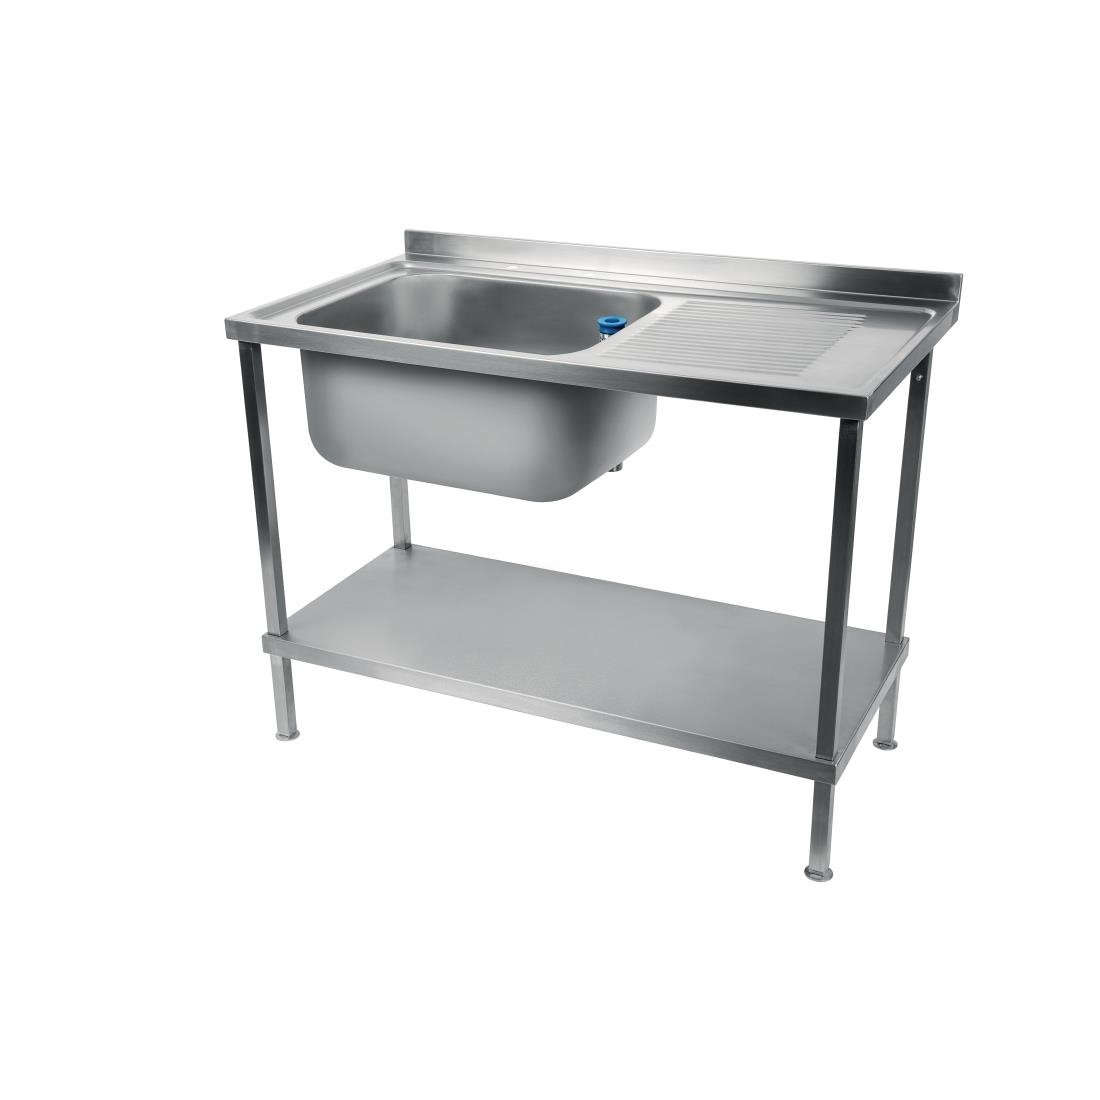 DR390 Holmes Fully Assembled Stainless Steel Sink Right Hand Drainer 1500mm JD Catering Equipment Solutions Ltd